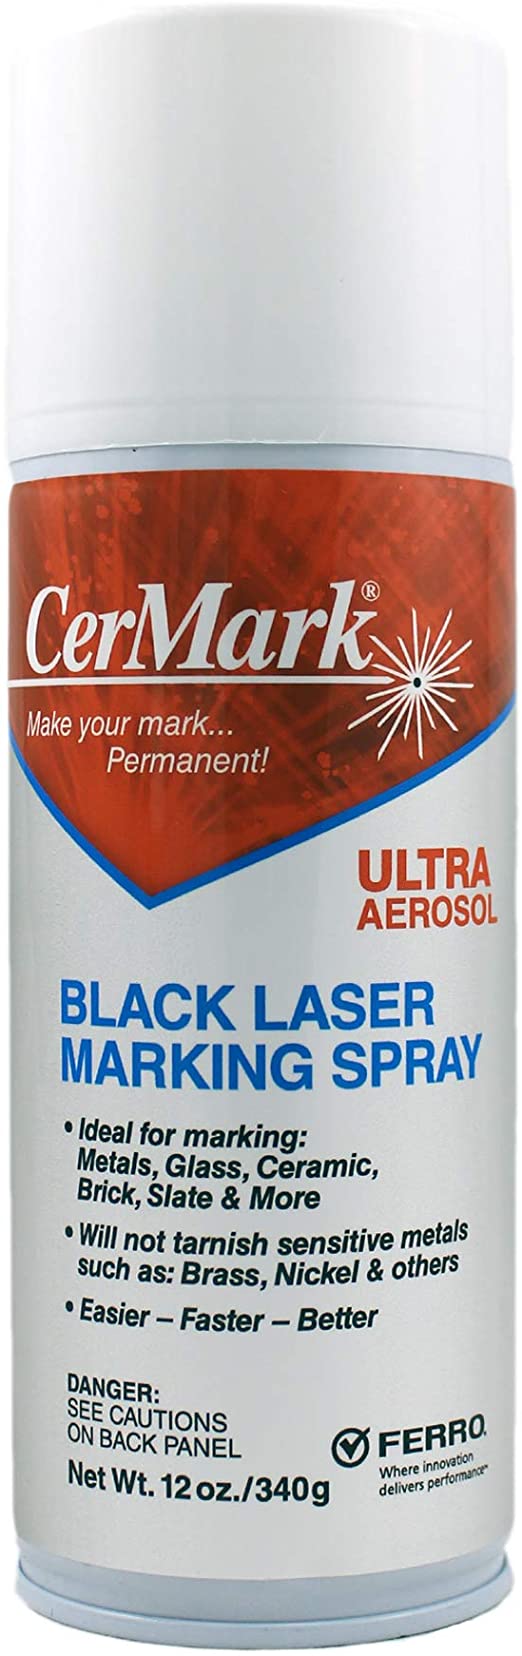 How to Use Cermark LMM 6000 